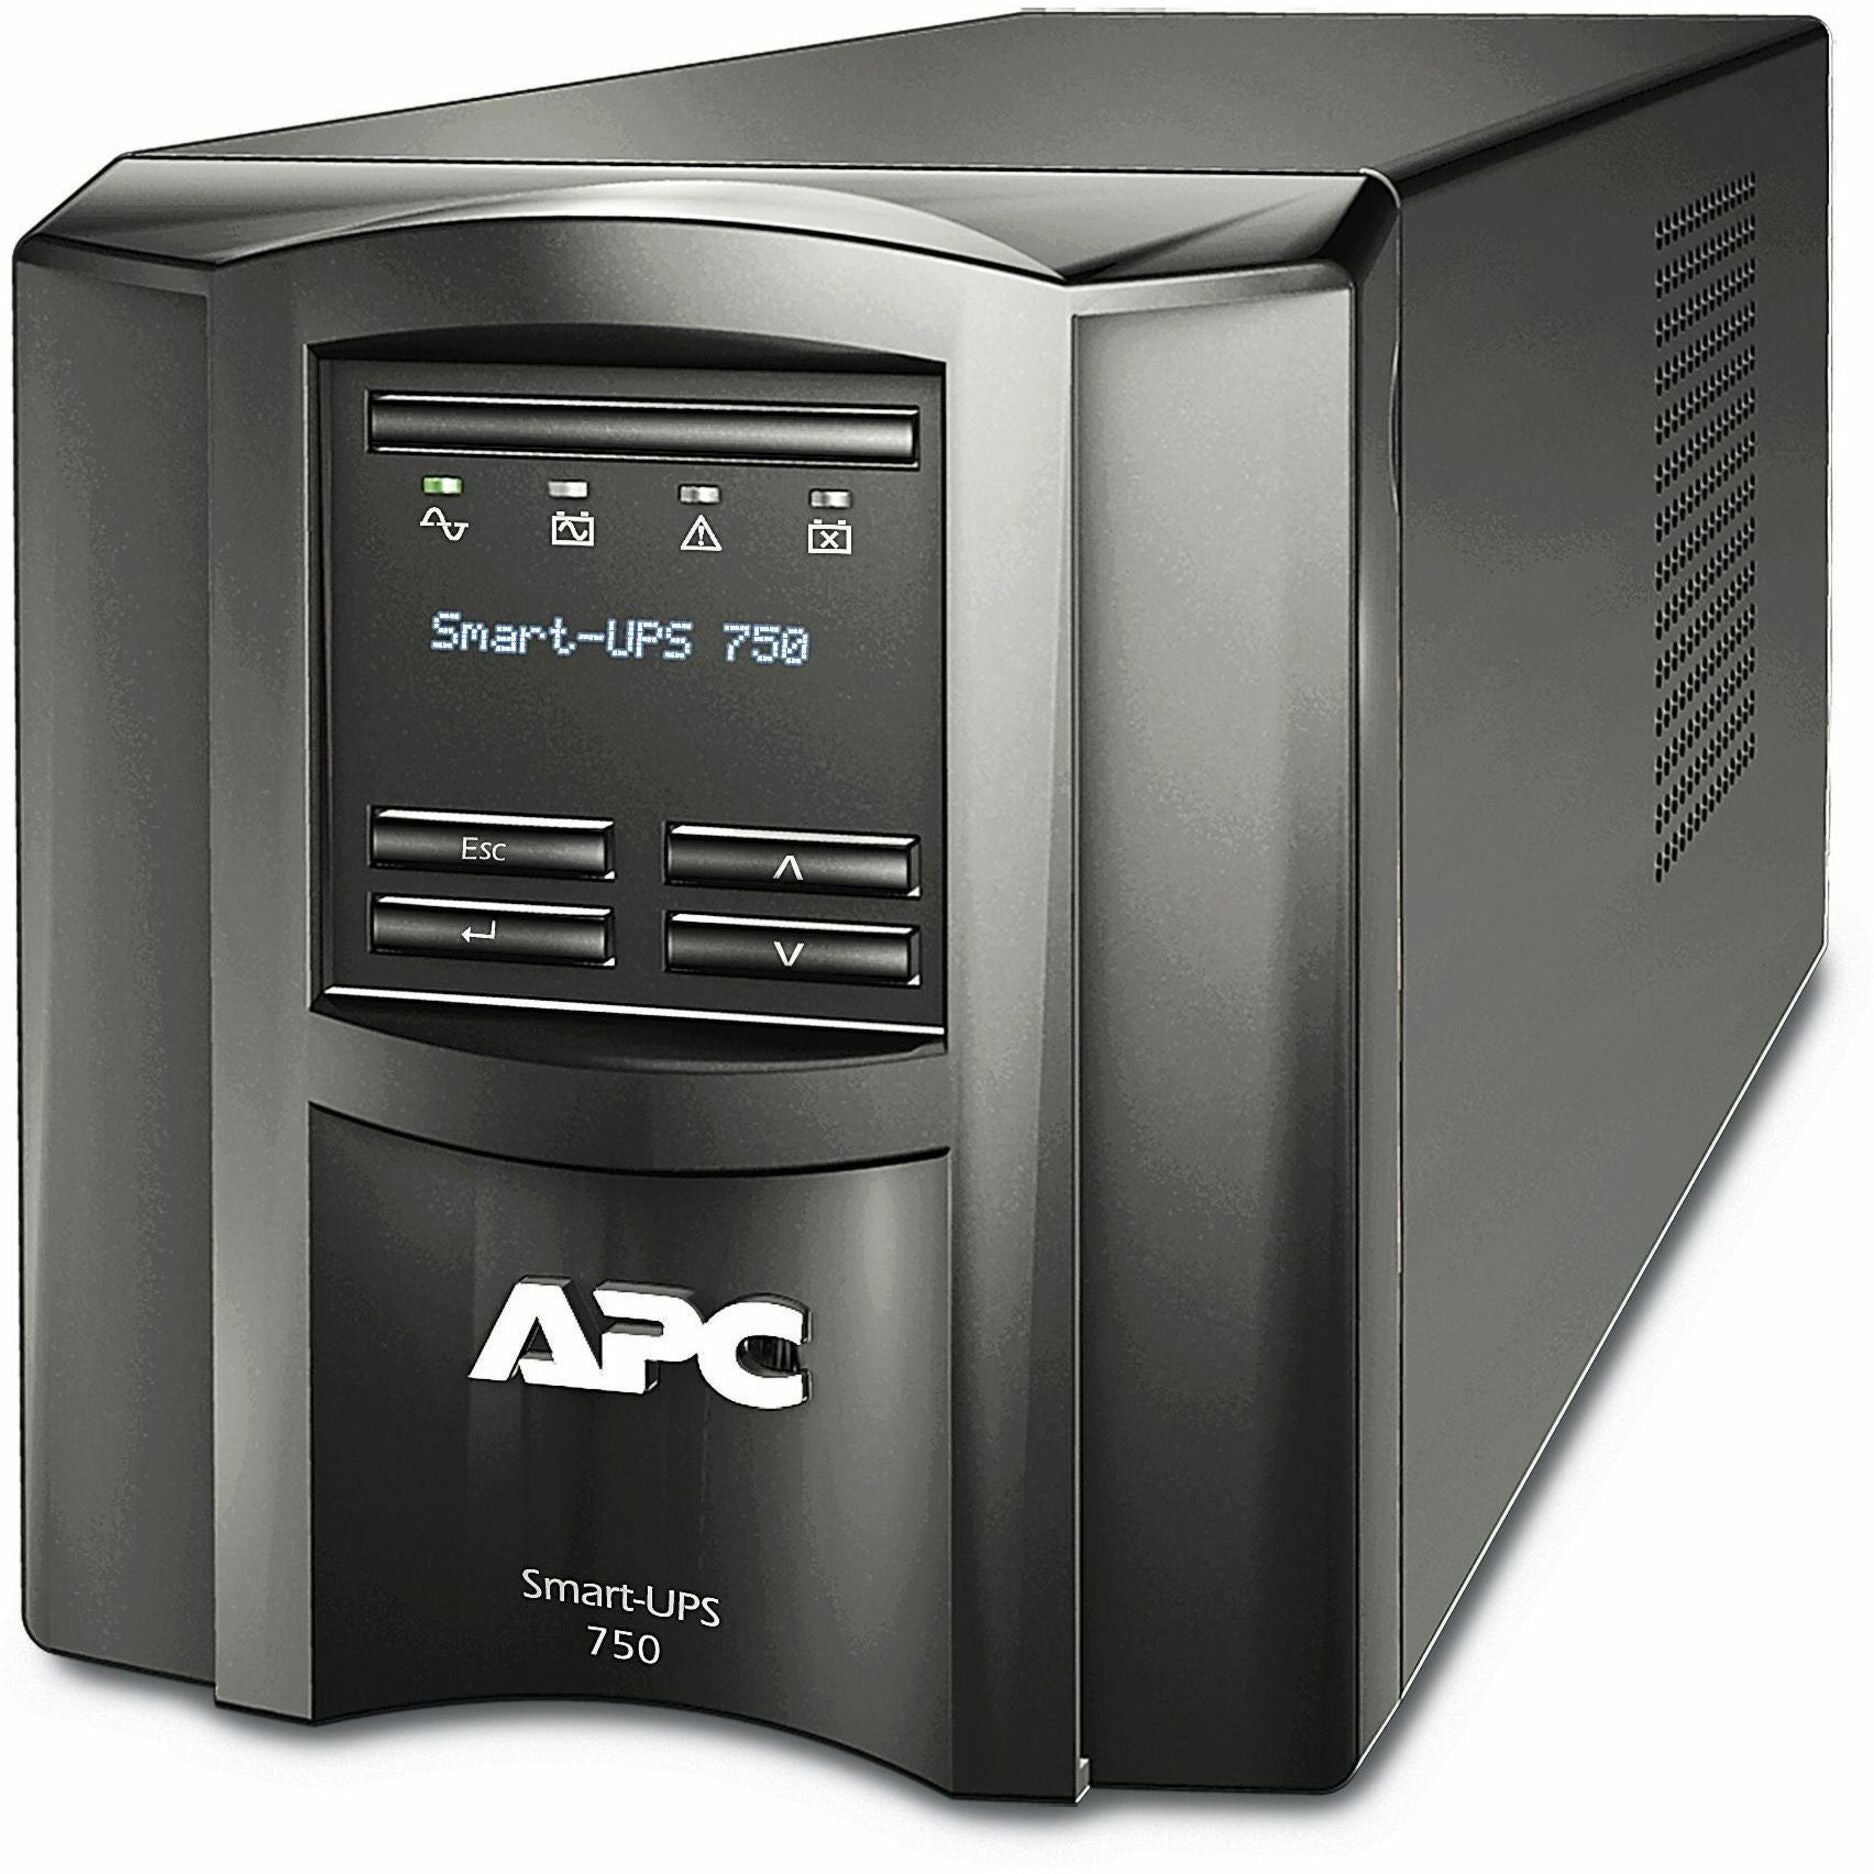 APC SMT750C Smart-UPS 750VA LCD 120V with SmartConnect, Energy Star, 3 Year Warranty